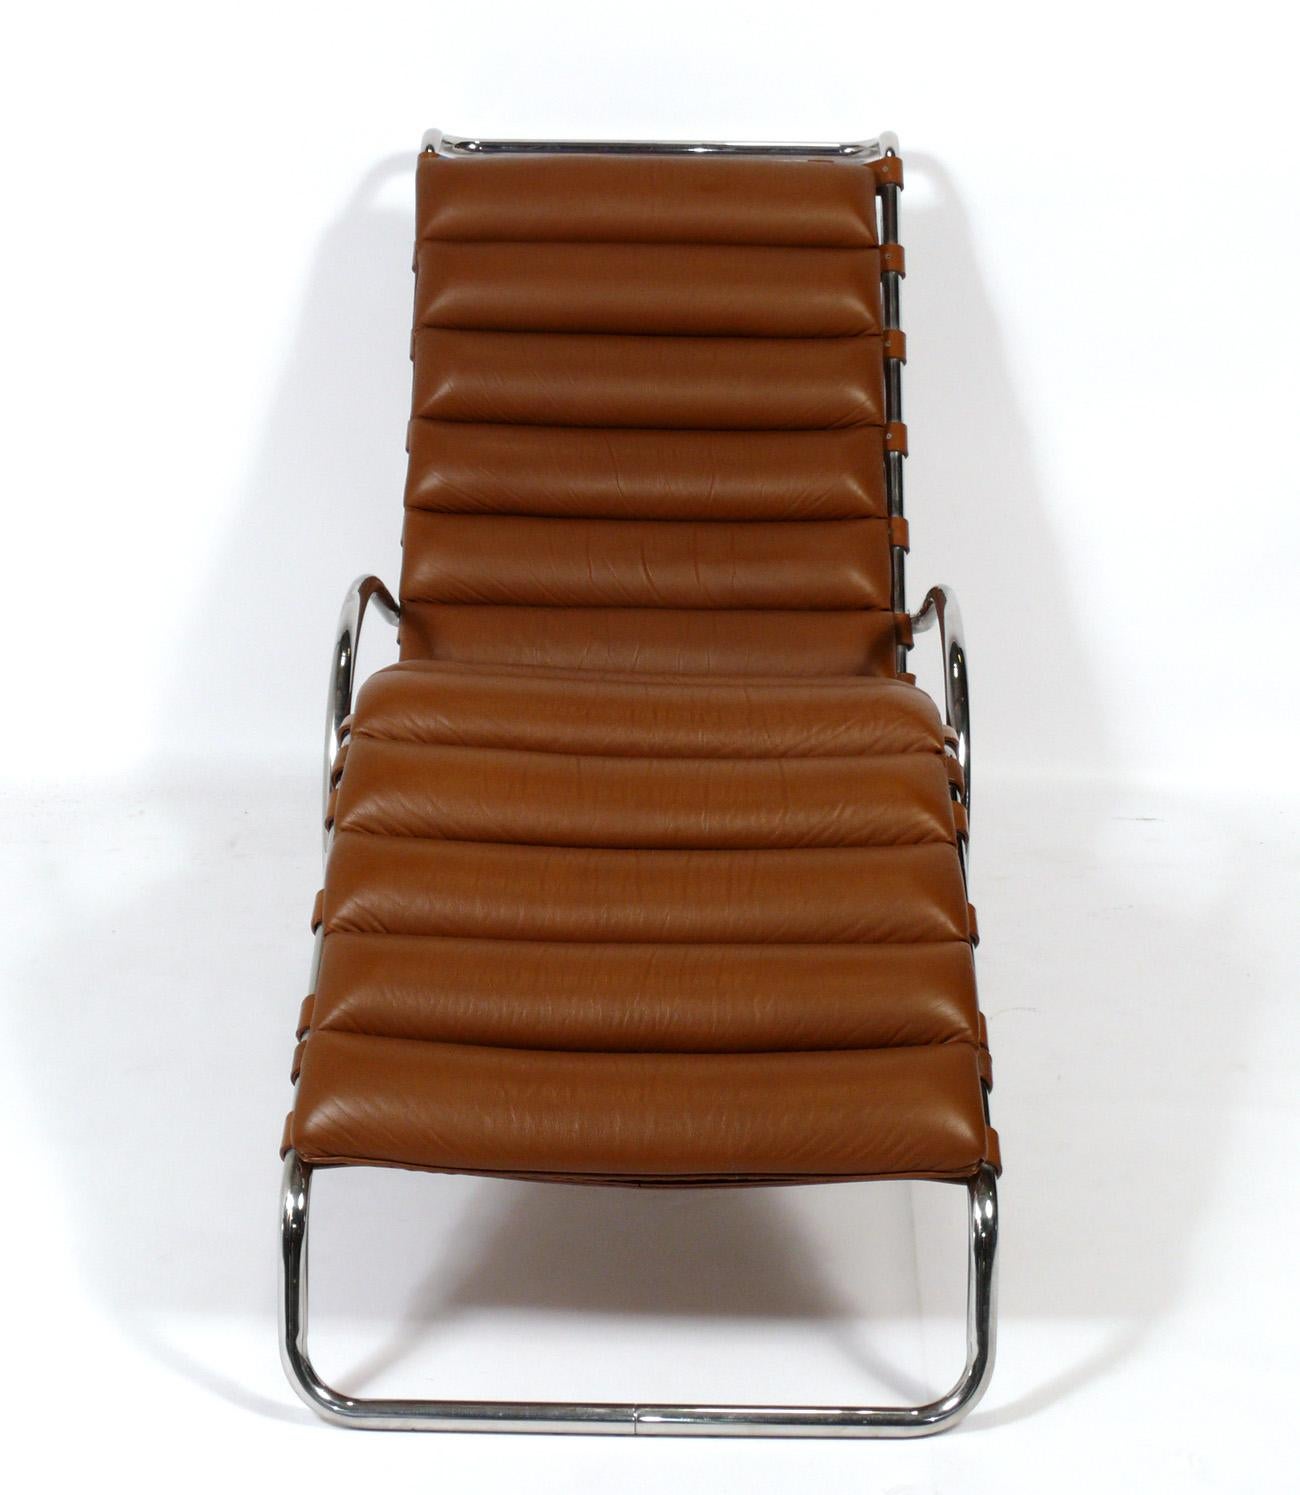 Sculptural mid century chaise lounge, designed by Ludwig Mies van der Rohe for Knoll, American, circa 1980s. It retains it's original caramel leather upholstery, which is perfectly broken in. The leather has been cleaned and conditioned and the